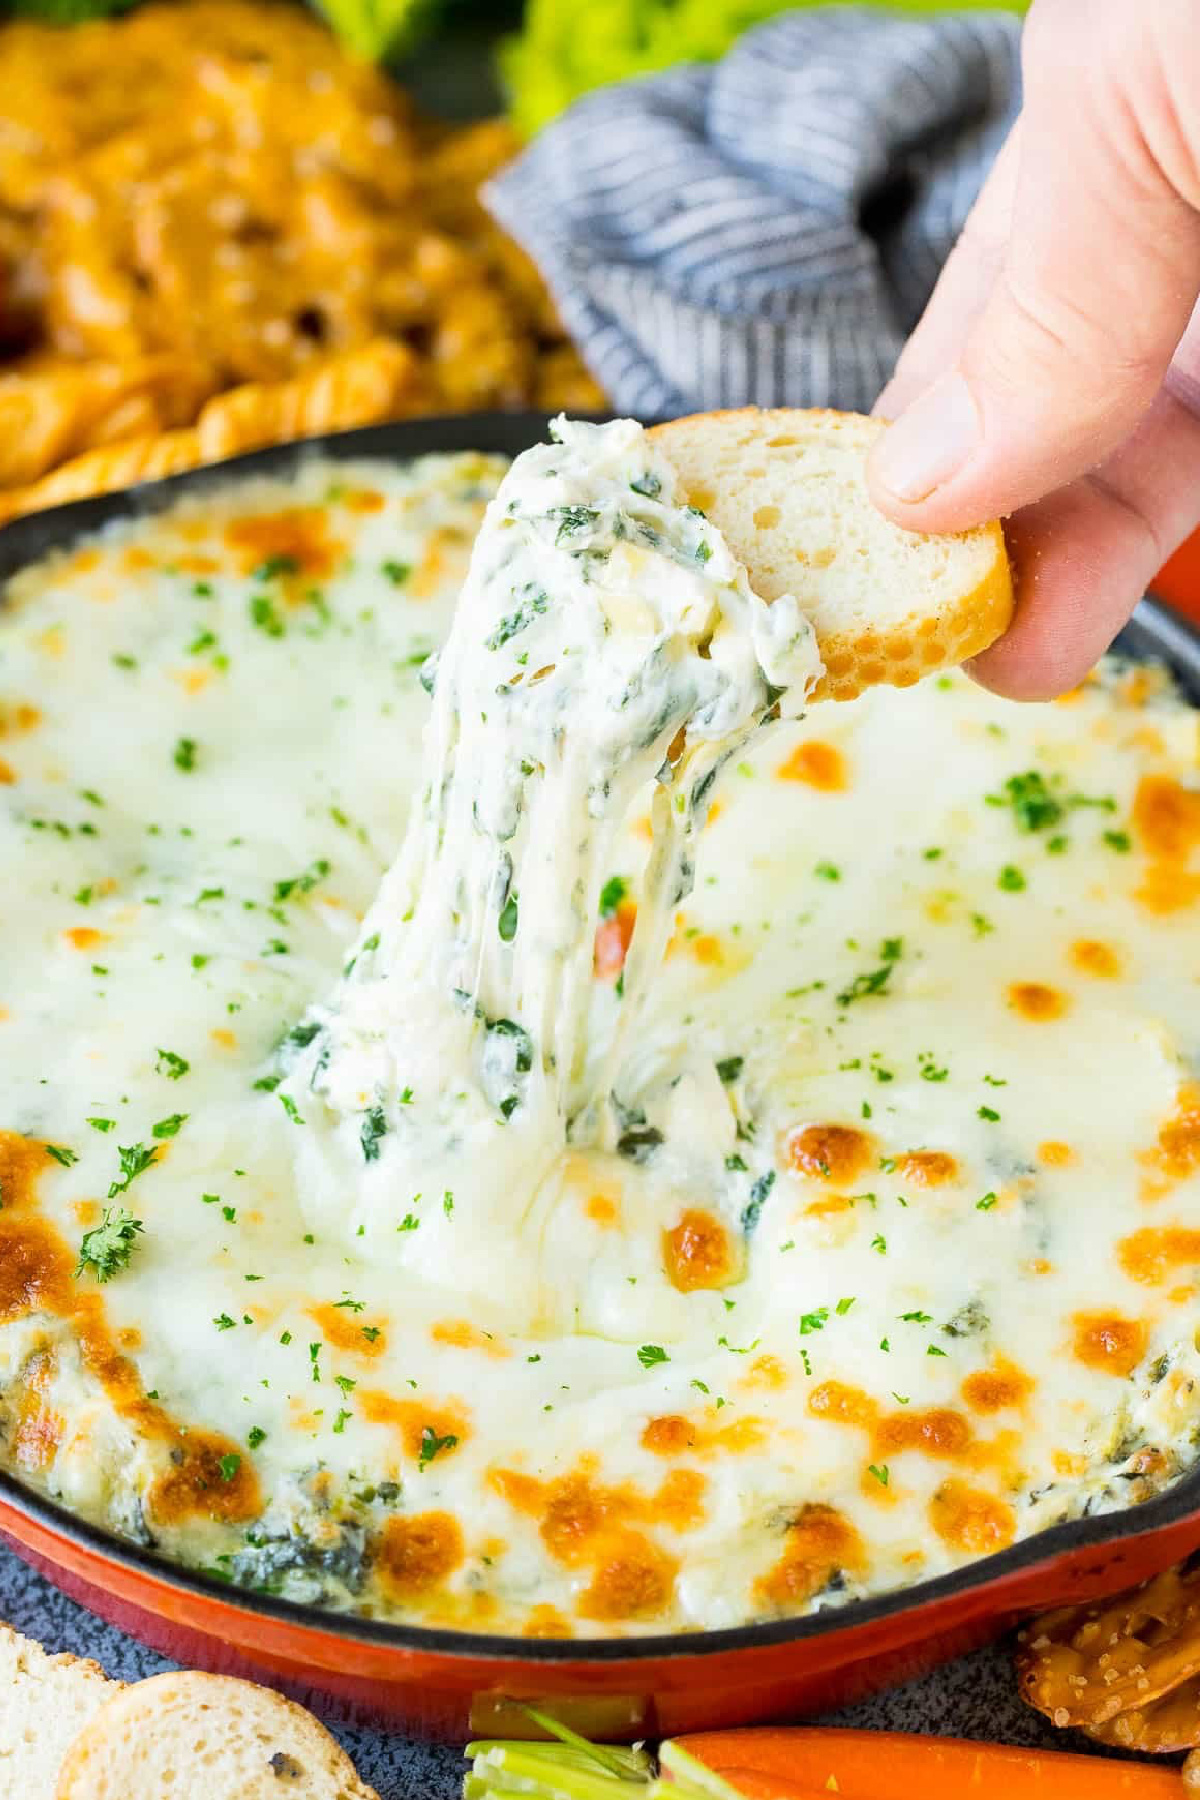 Cheap Party Food Ideas - Baked Spinach and Artichoke Dip